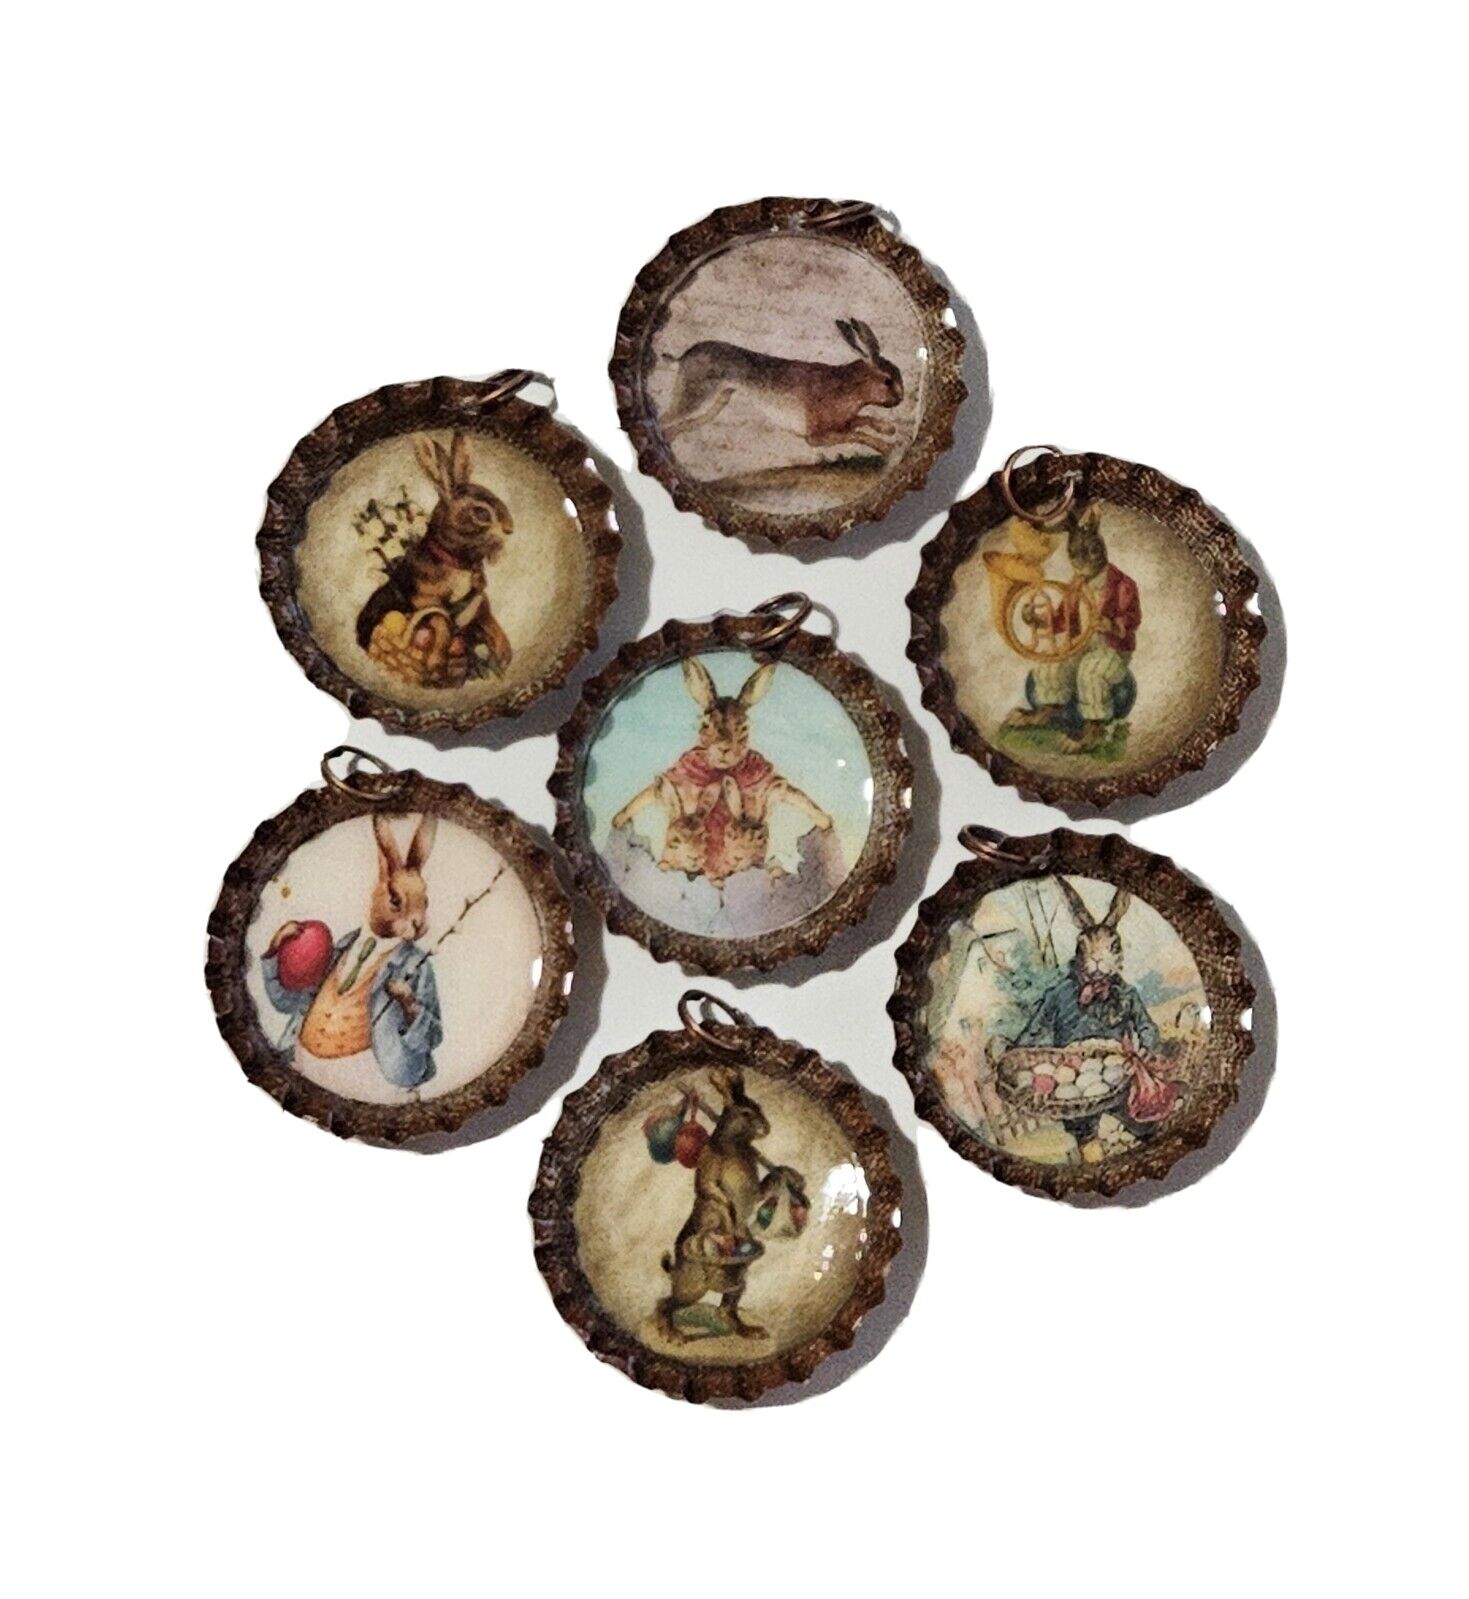 7 Easter Nostalgic Vintage Bunny Bottle Cap Charms Mini Tree Ornaments Spring Handmade Does Not Apply